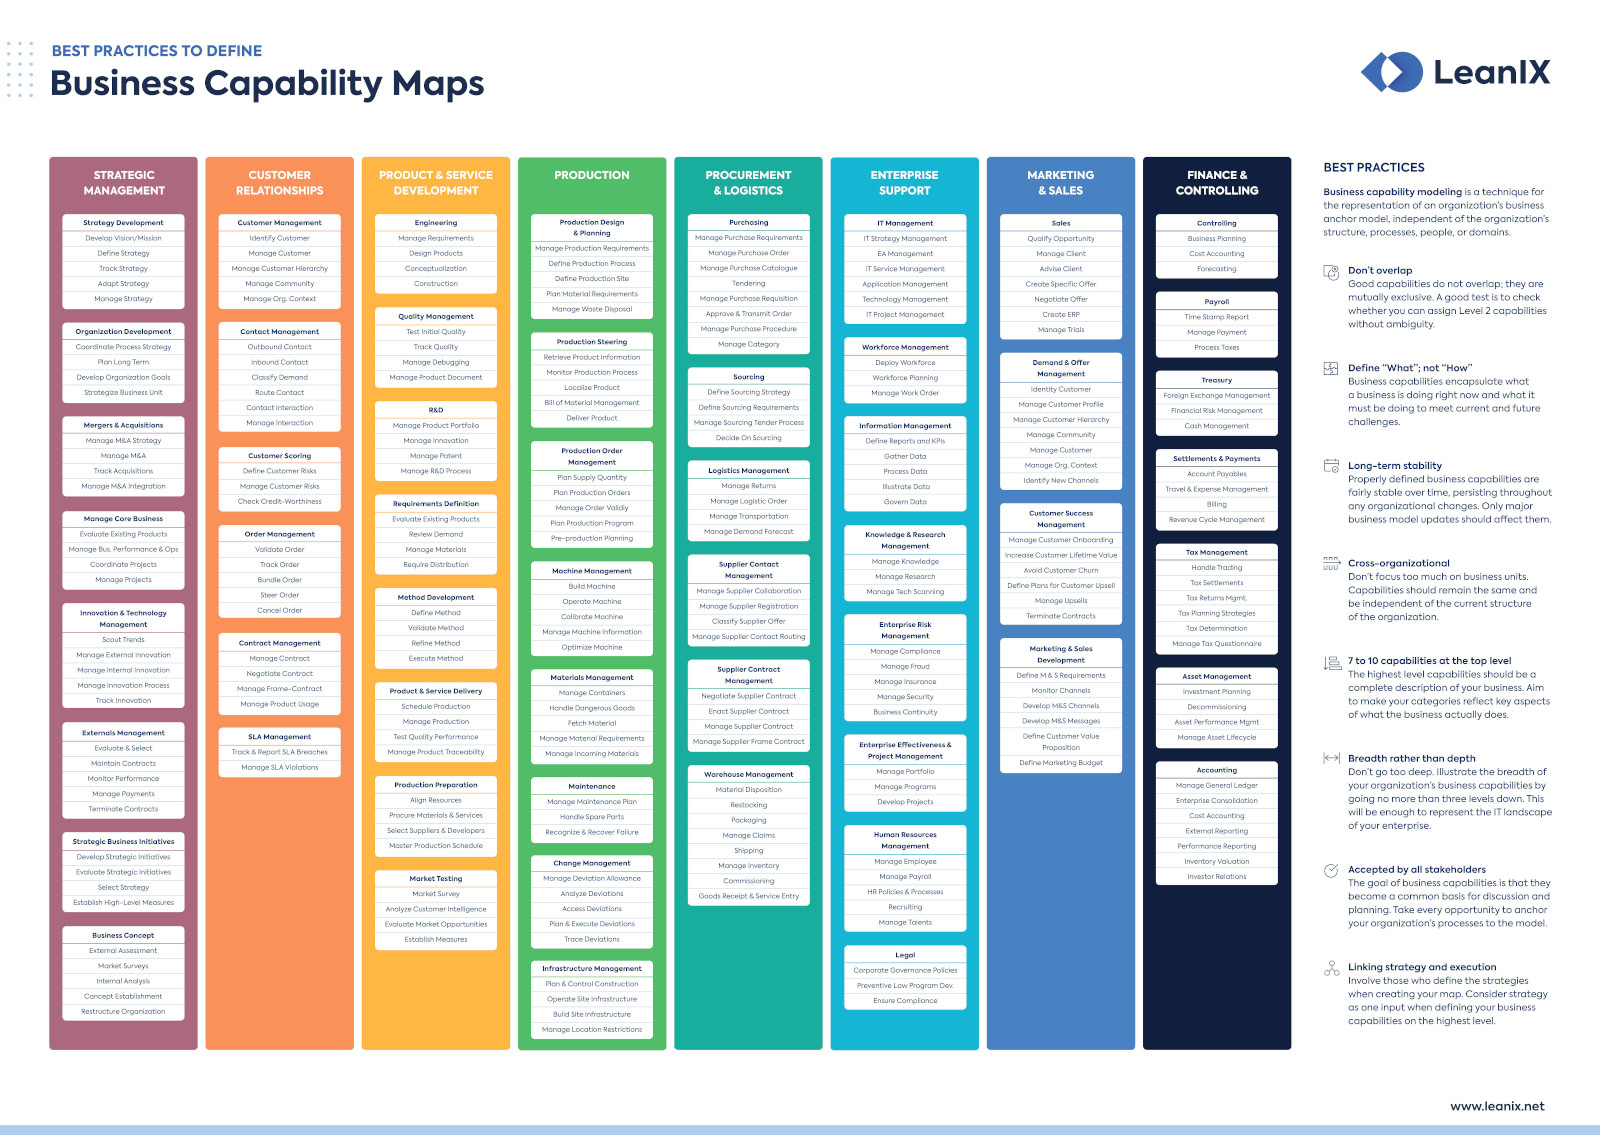 Business Capability Map Examples & Templates | LeanIX